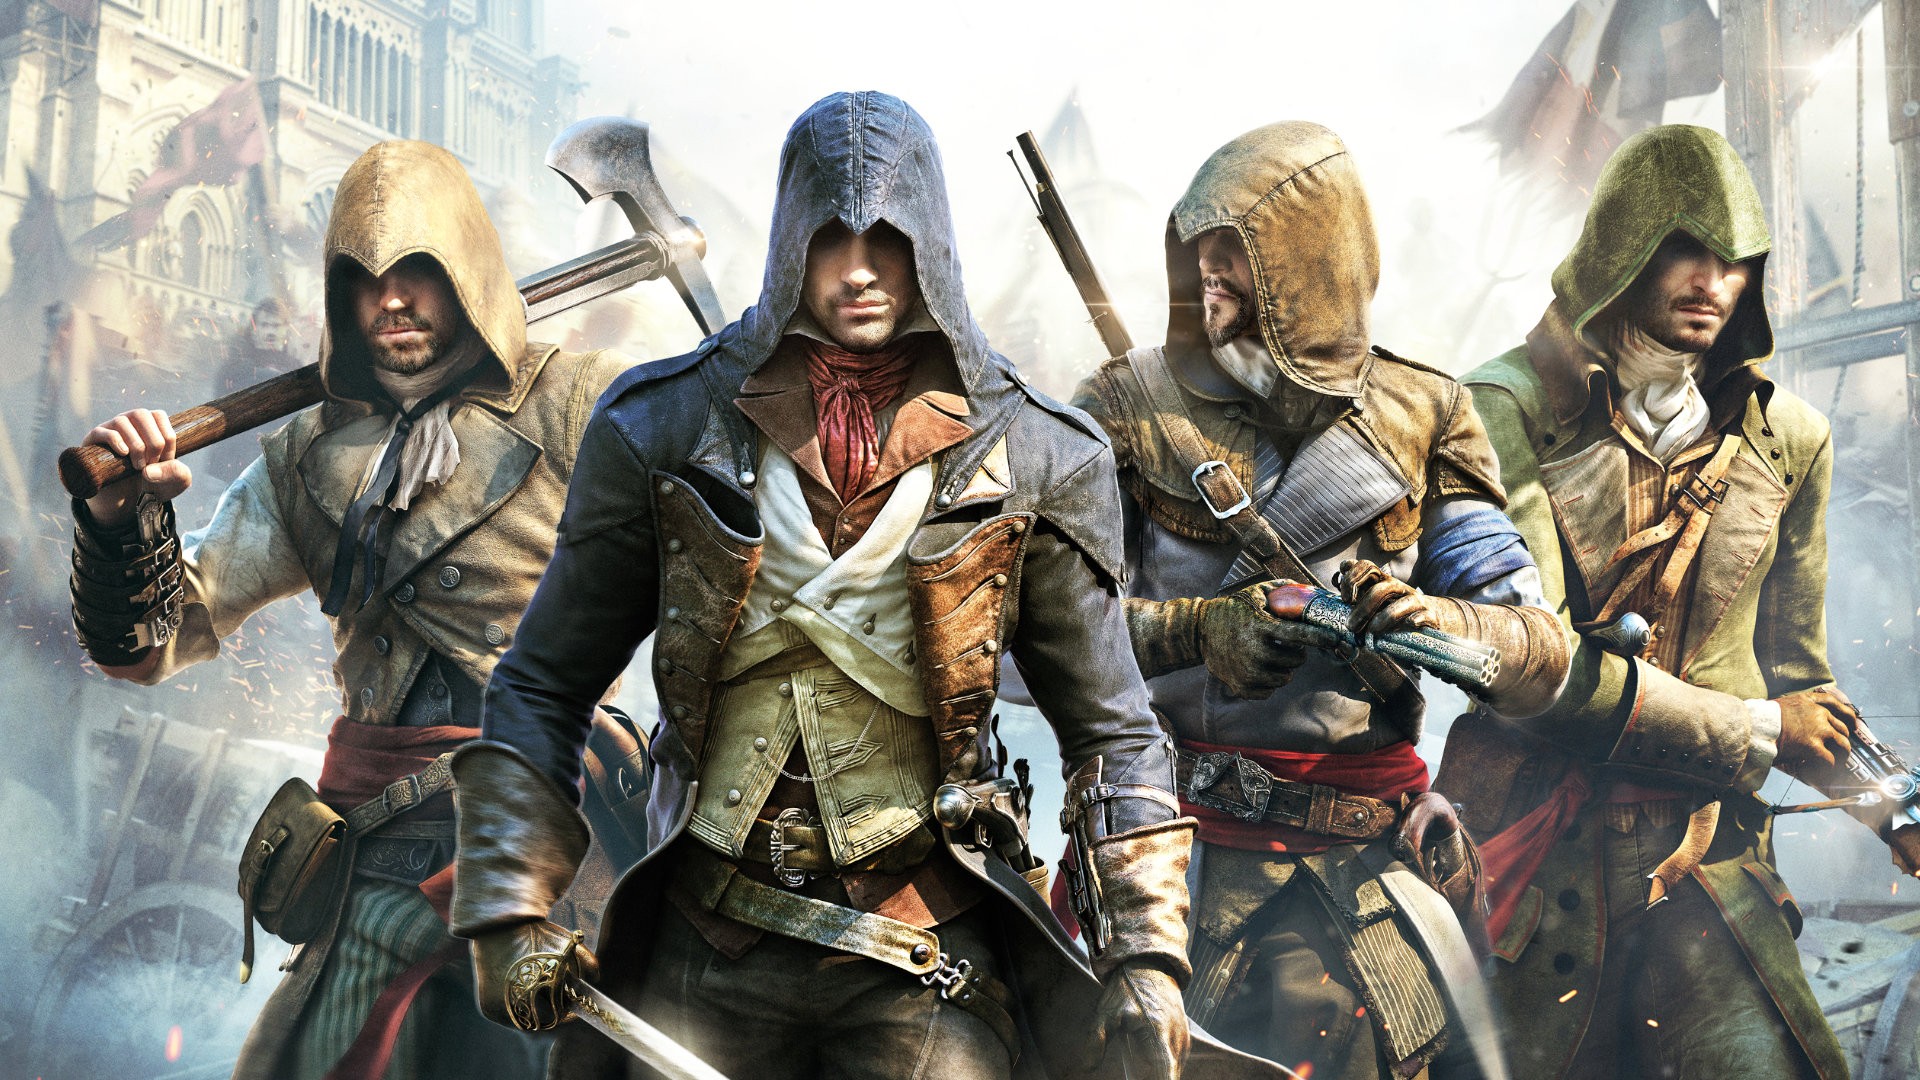 The best Assassin’s Creed game has the worst rep